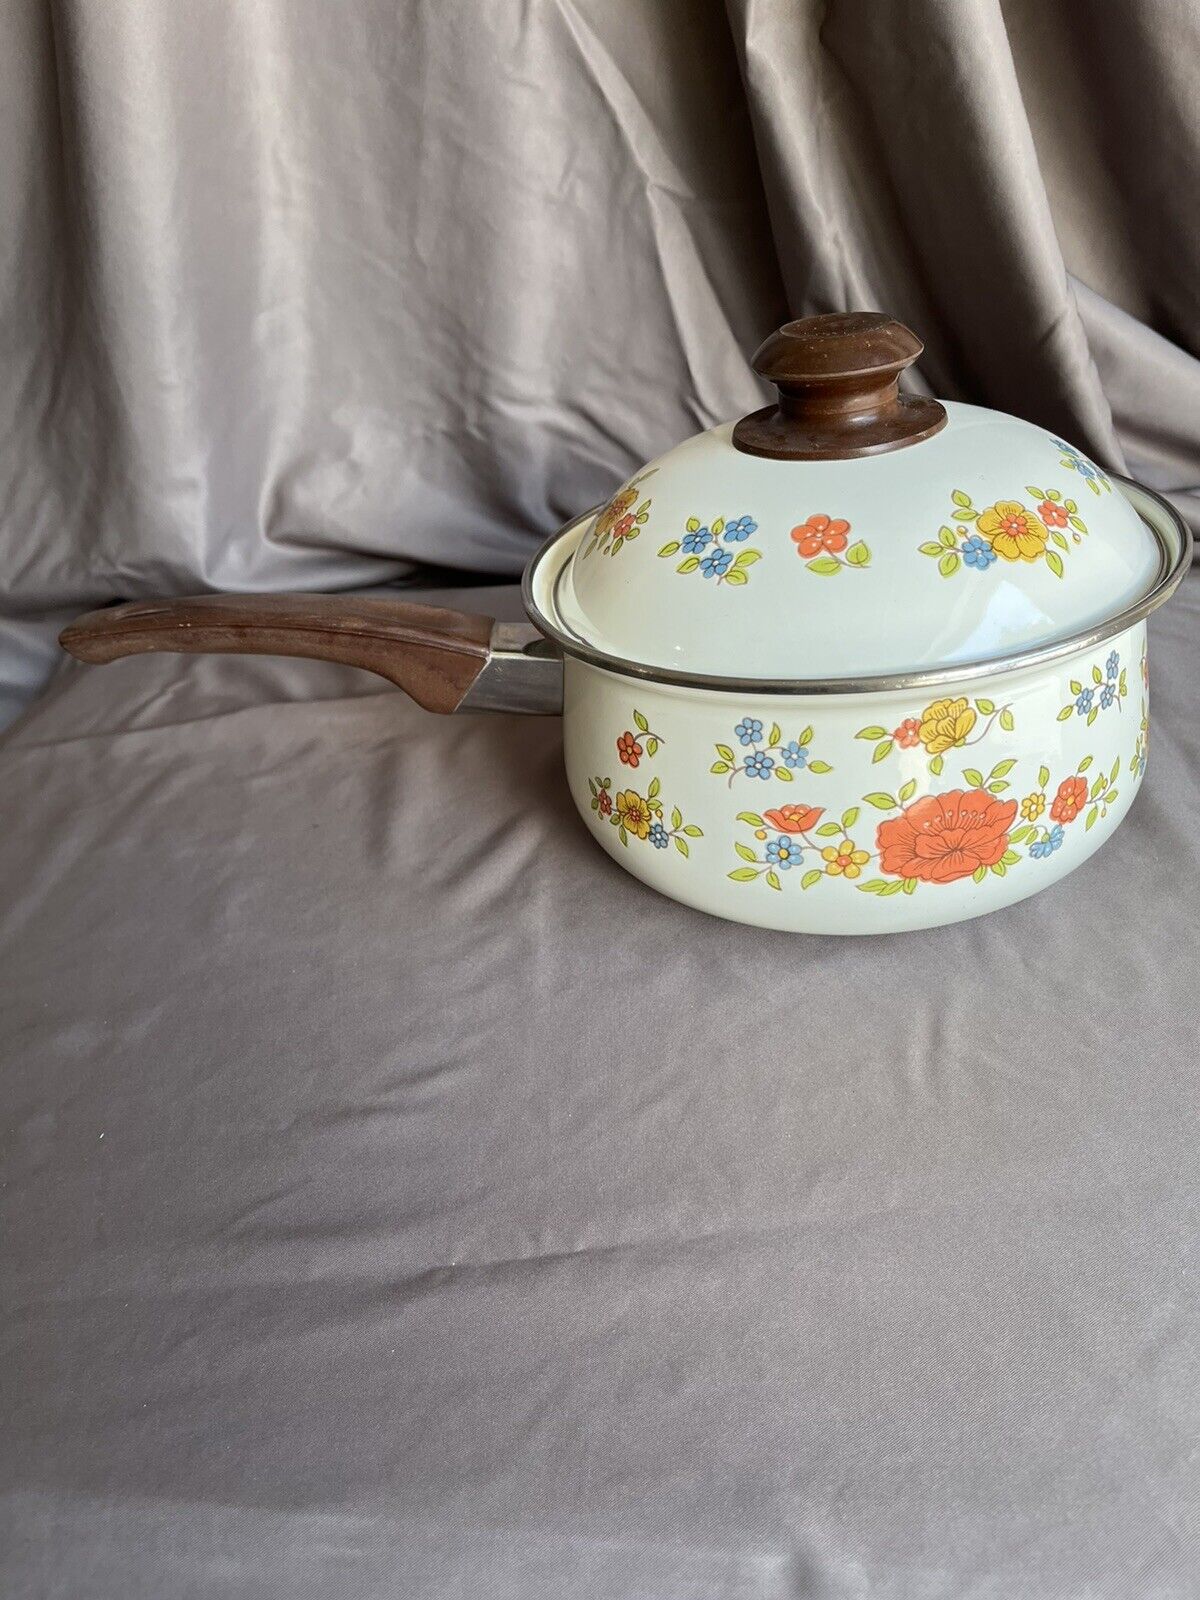 Vintage 1970s Summer Garden By Excel 1 Quart Cooking Saucepan With Lid